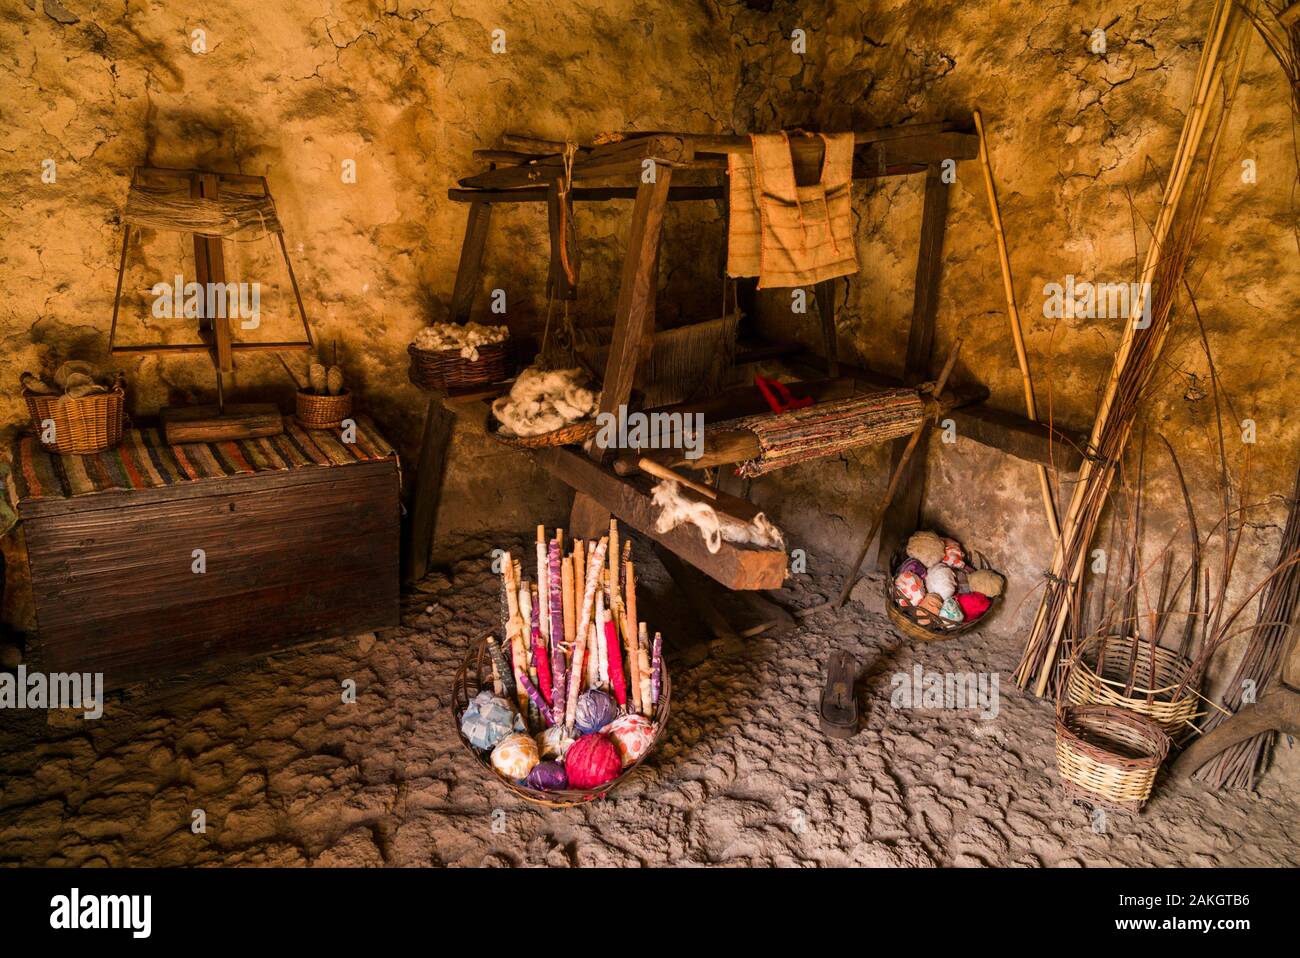 Spain, Canary Islands, El Hierro Island, Las Puntas, Ecomuseo de Guinea, stone houses of early settlers to the island from the 17th century, house interior Stock Photo